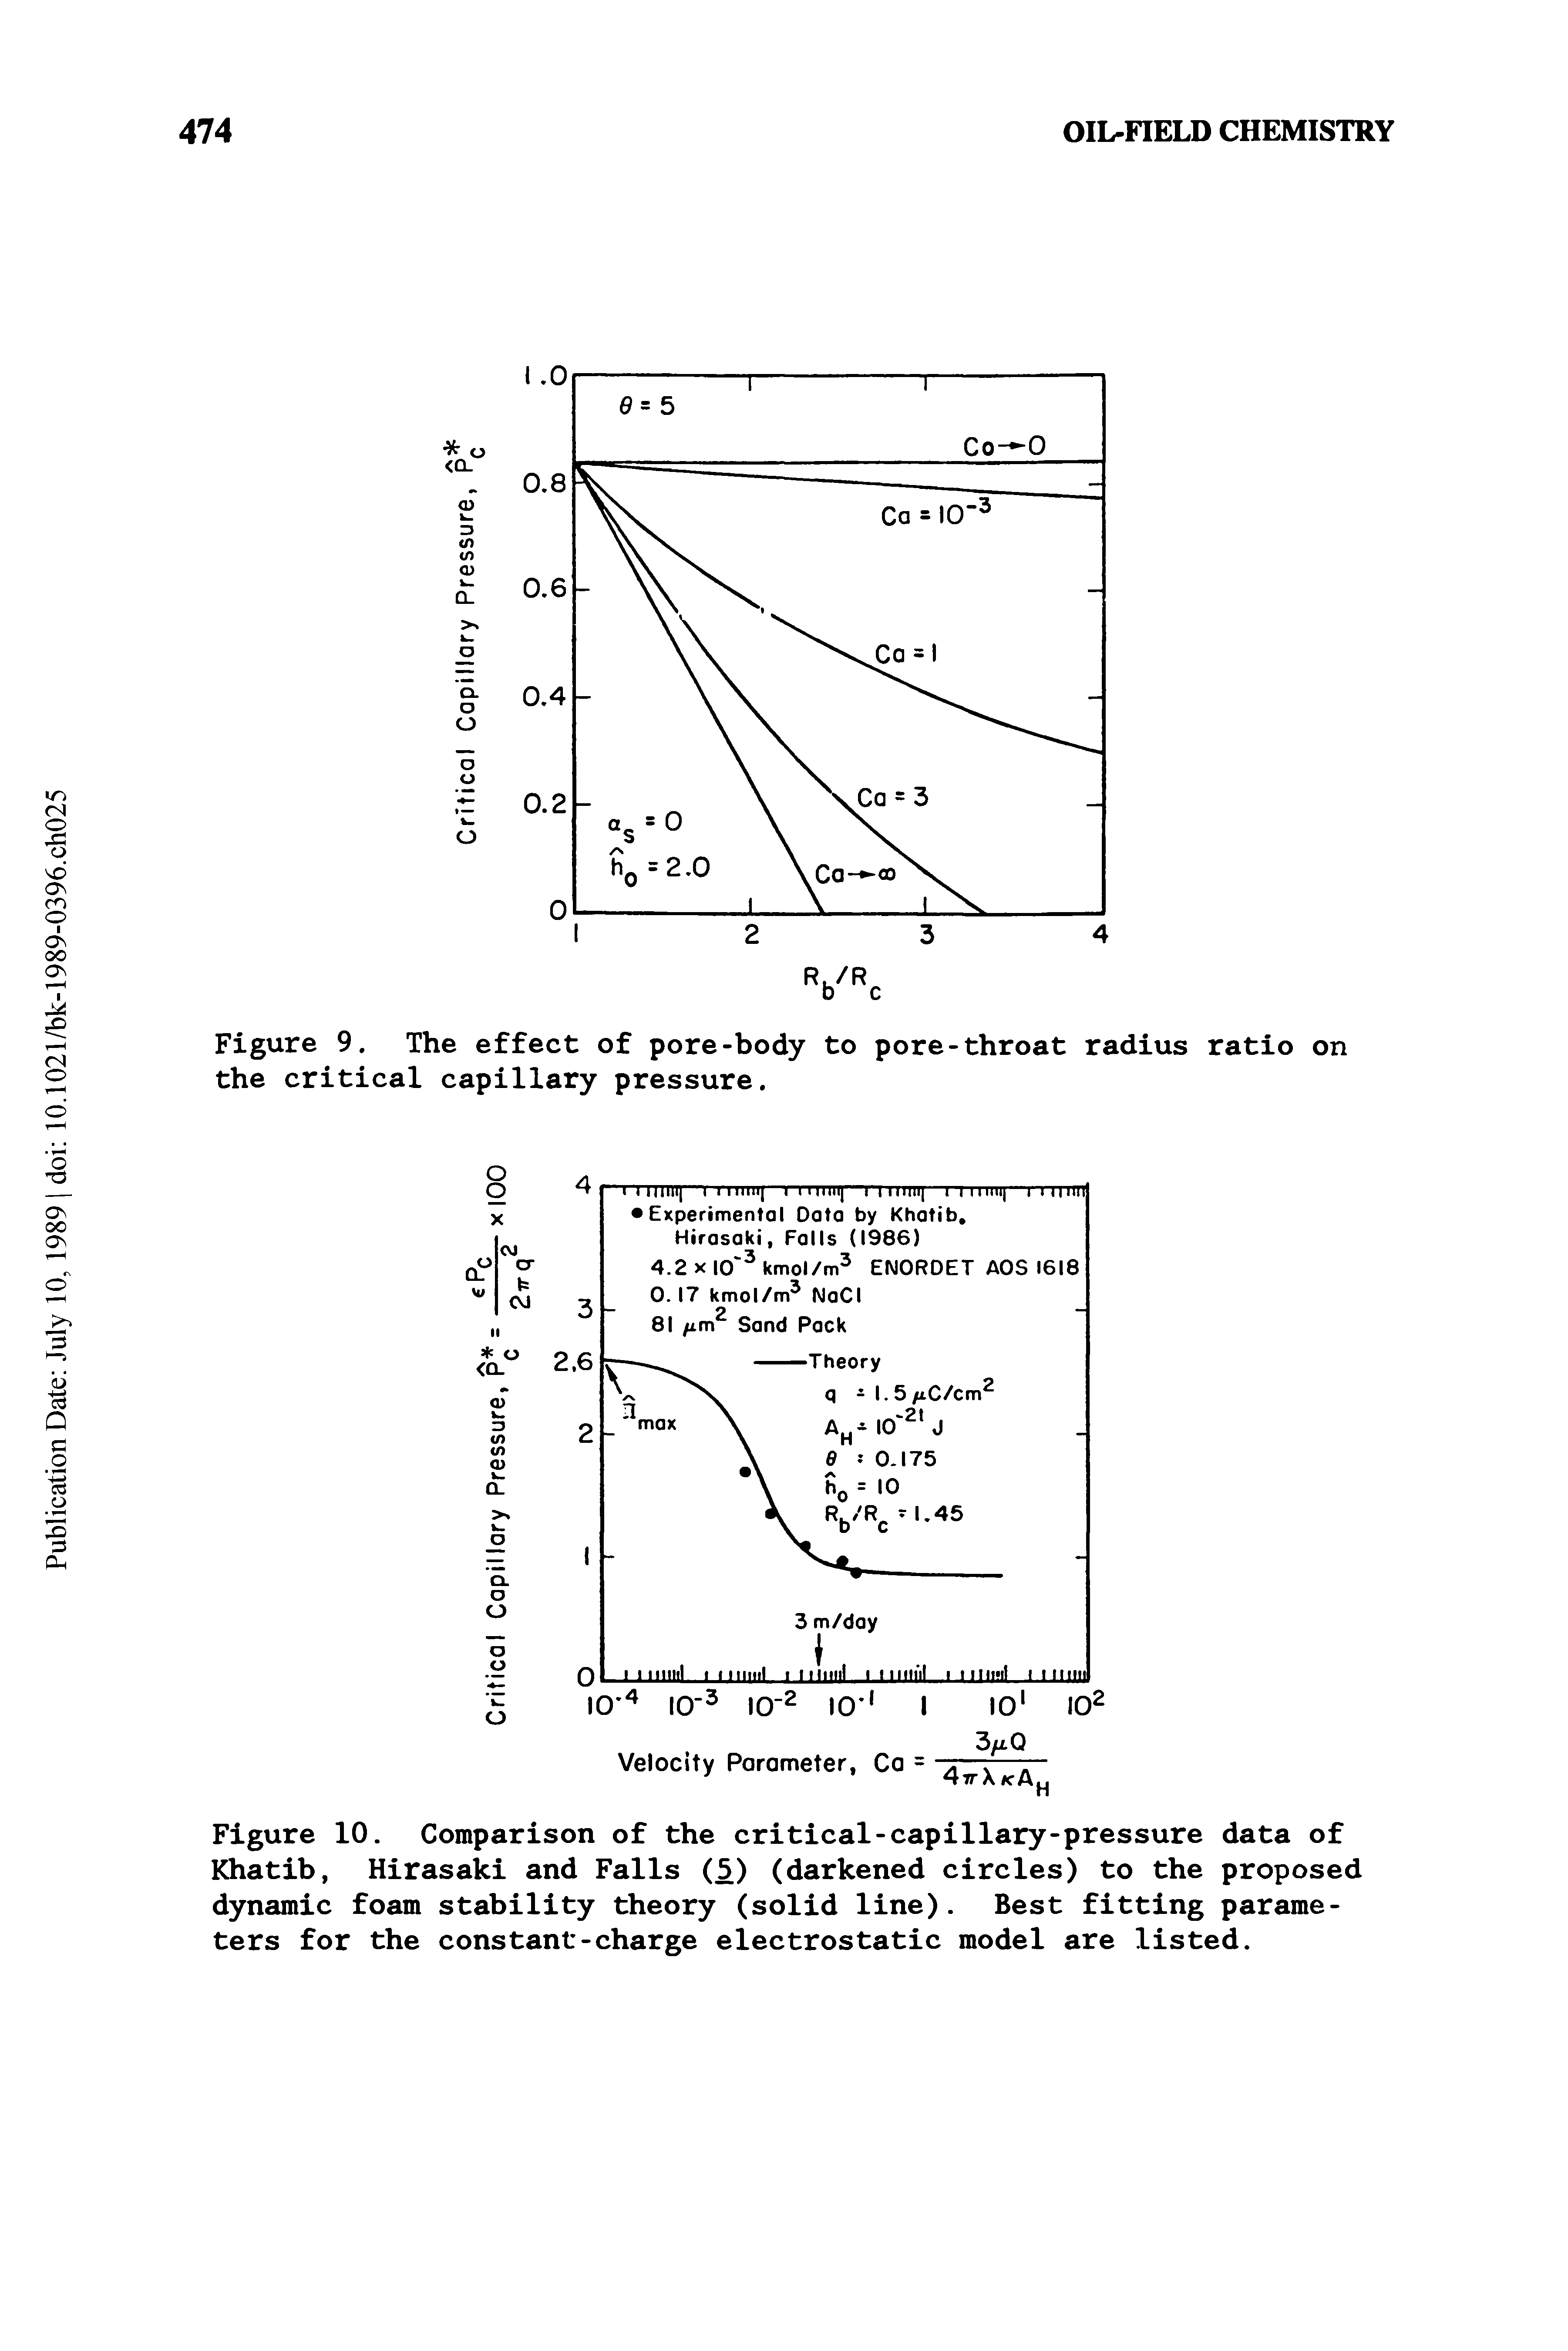 Figure 10. Comparison of the critical-capillary-pressure data of Khatib, Hirasaki and Falls (5) (darkened circles) to the proposed dynamic foam stability theory (solid line). Best fitting parameters for the constant-charge electrostatic model are listed.